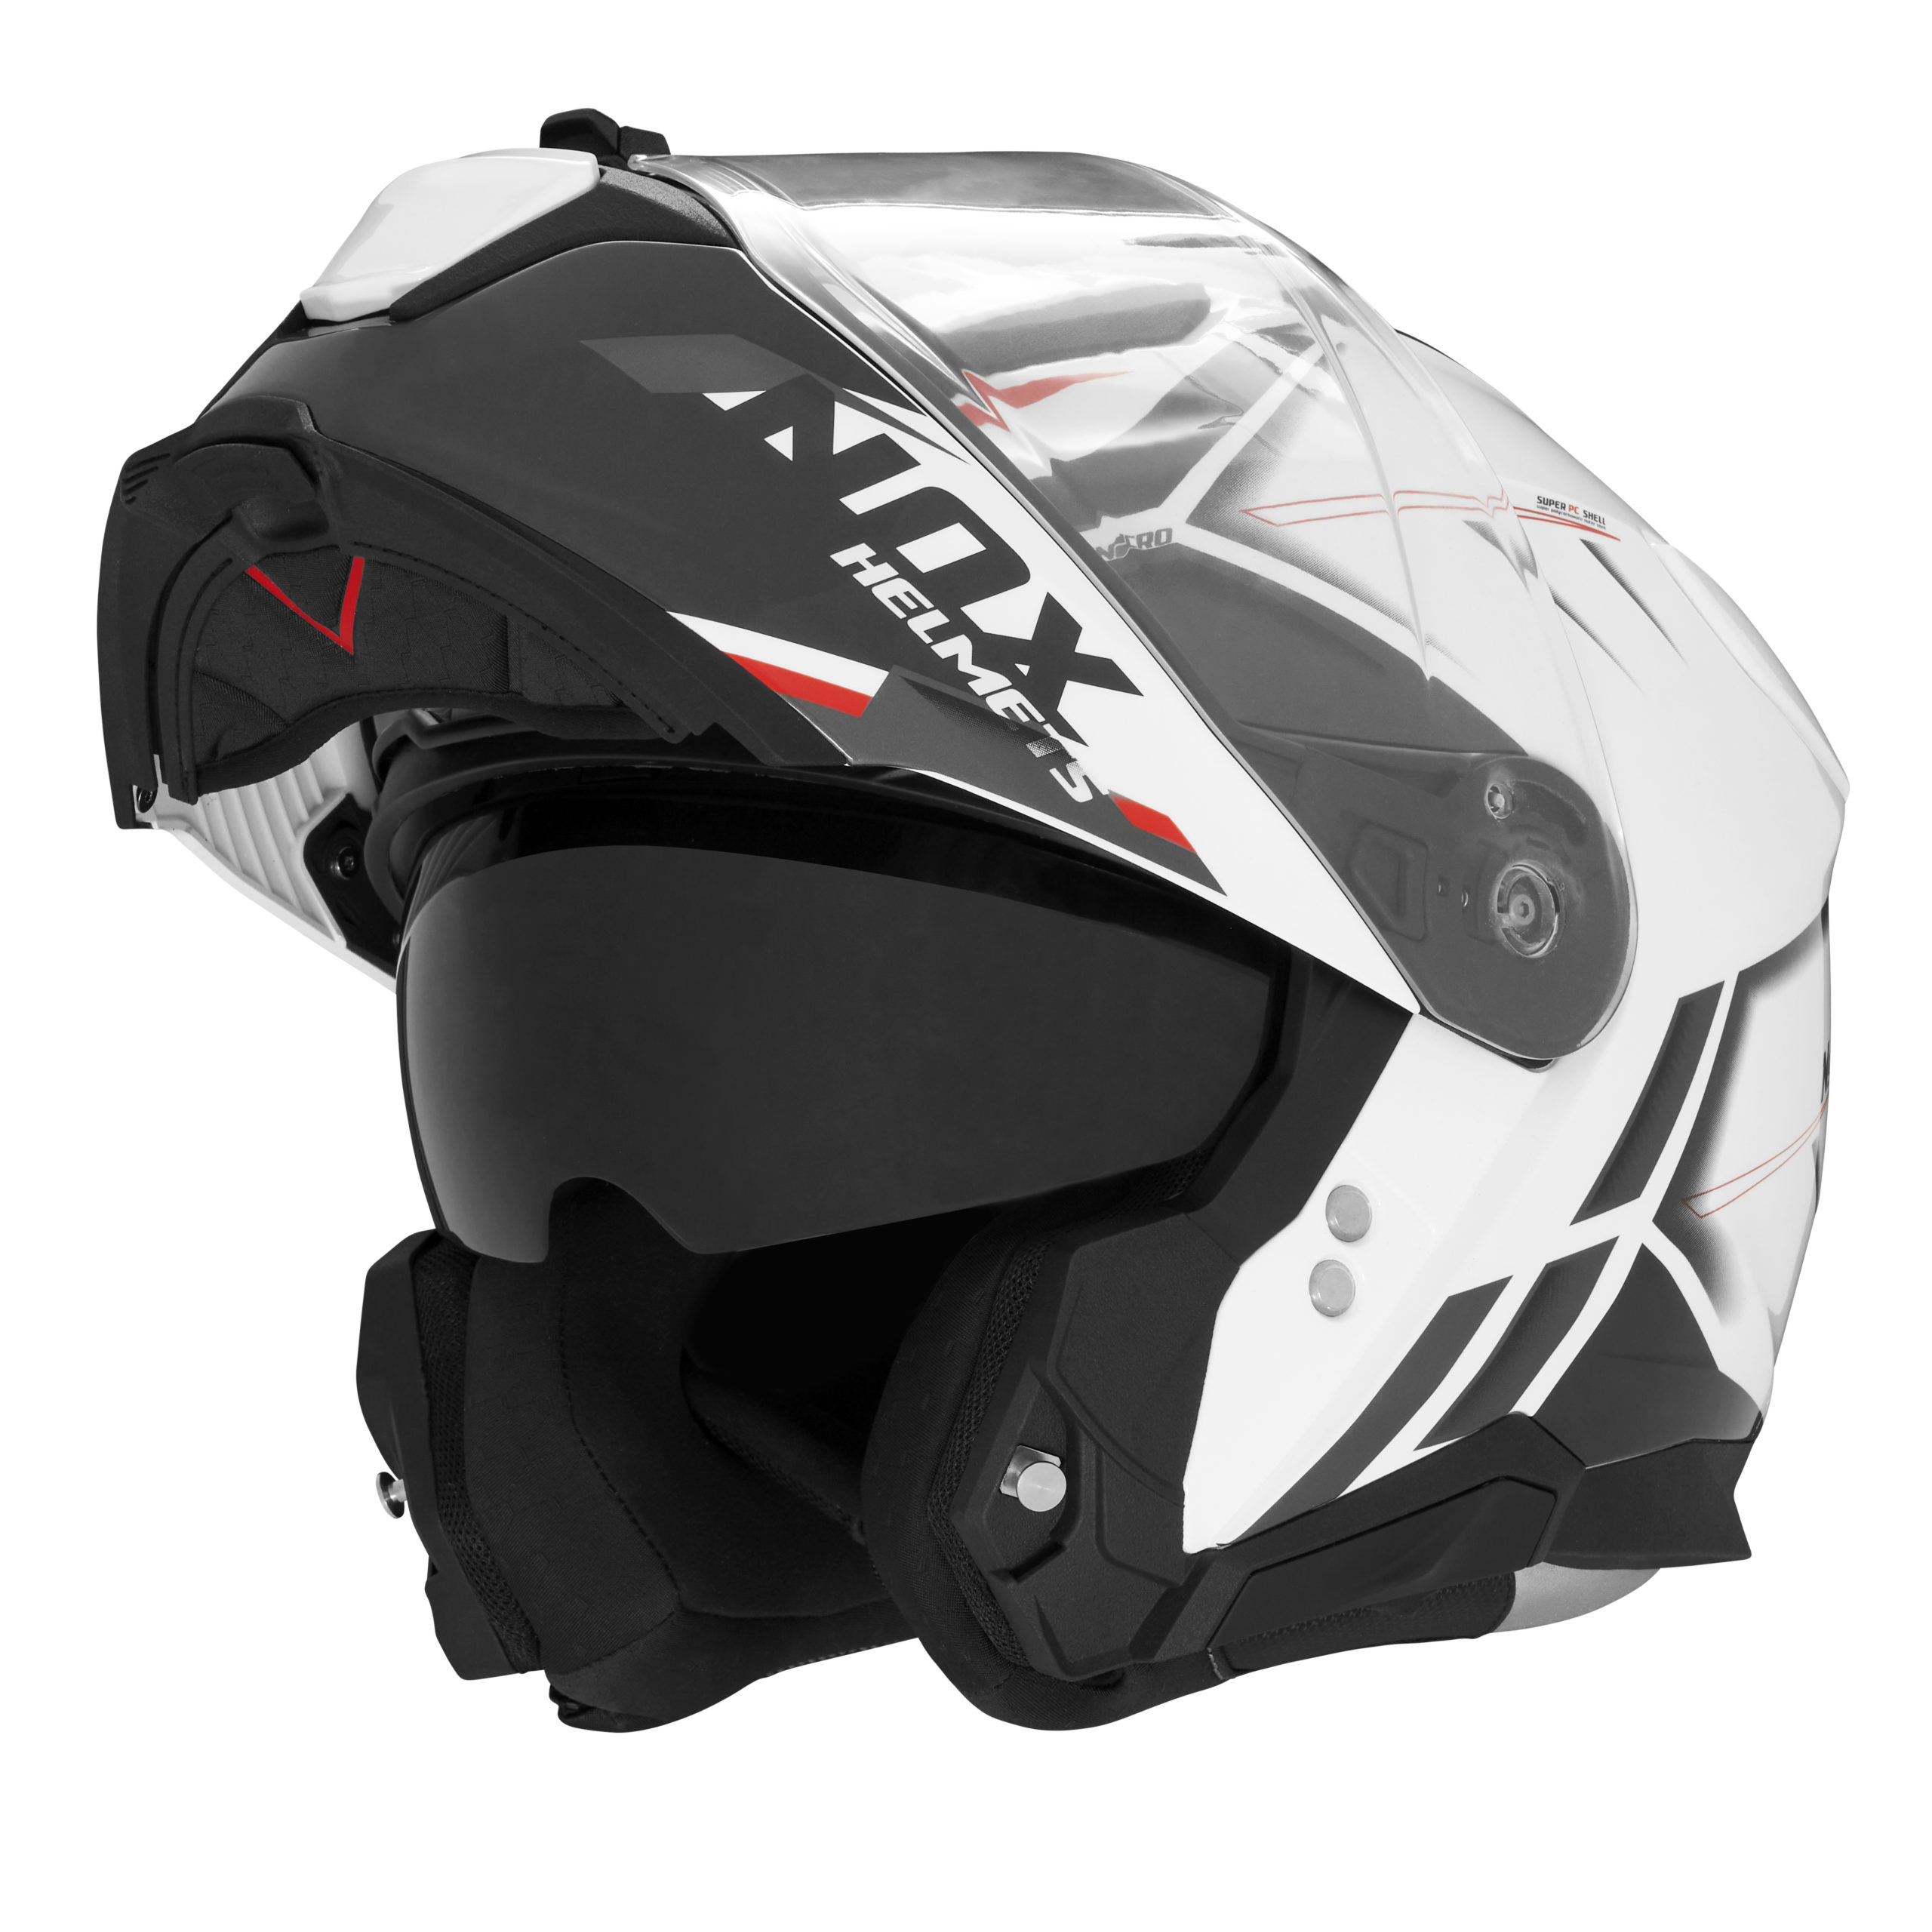 Casque moto modulable N 967 SYNCHRO blanc rouge